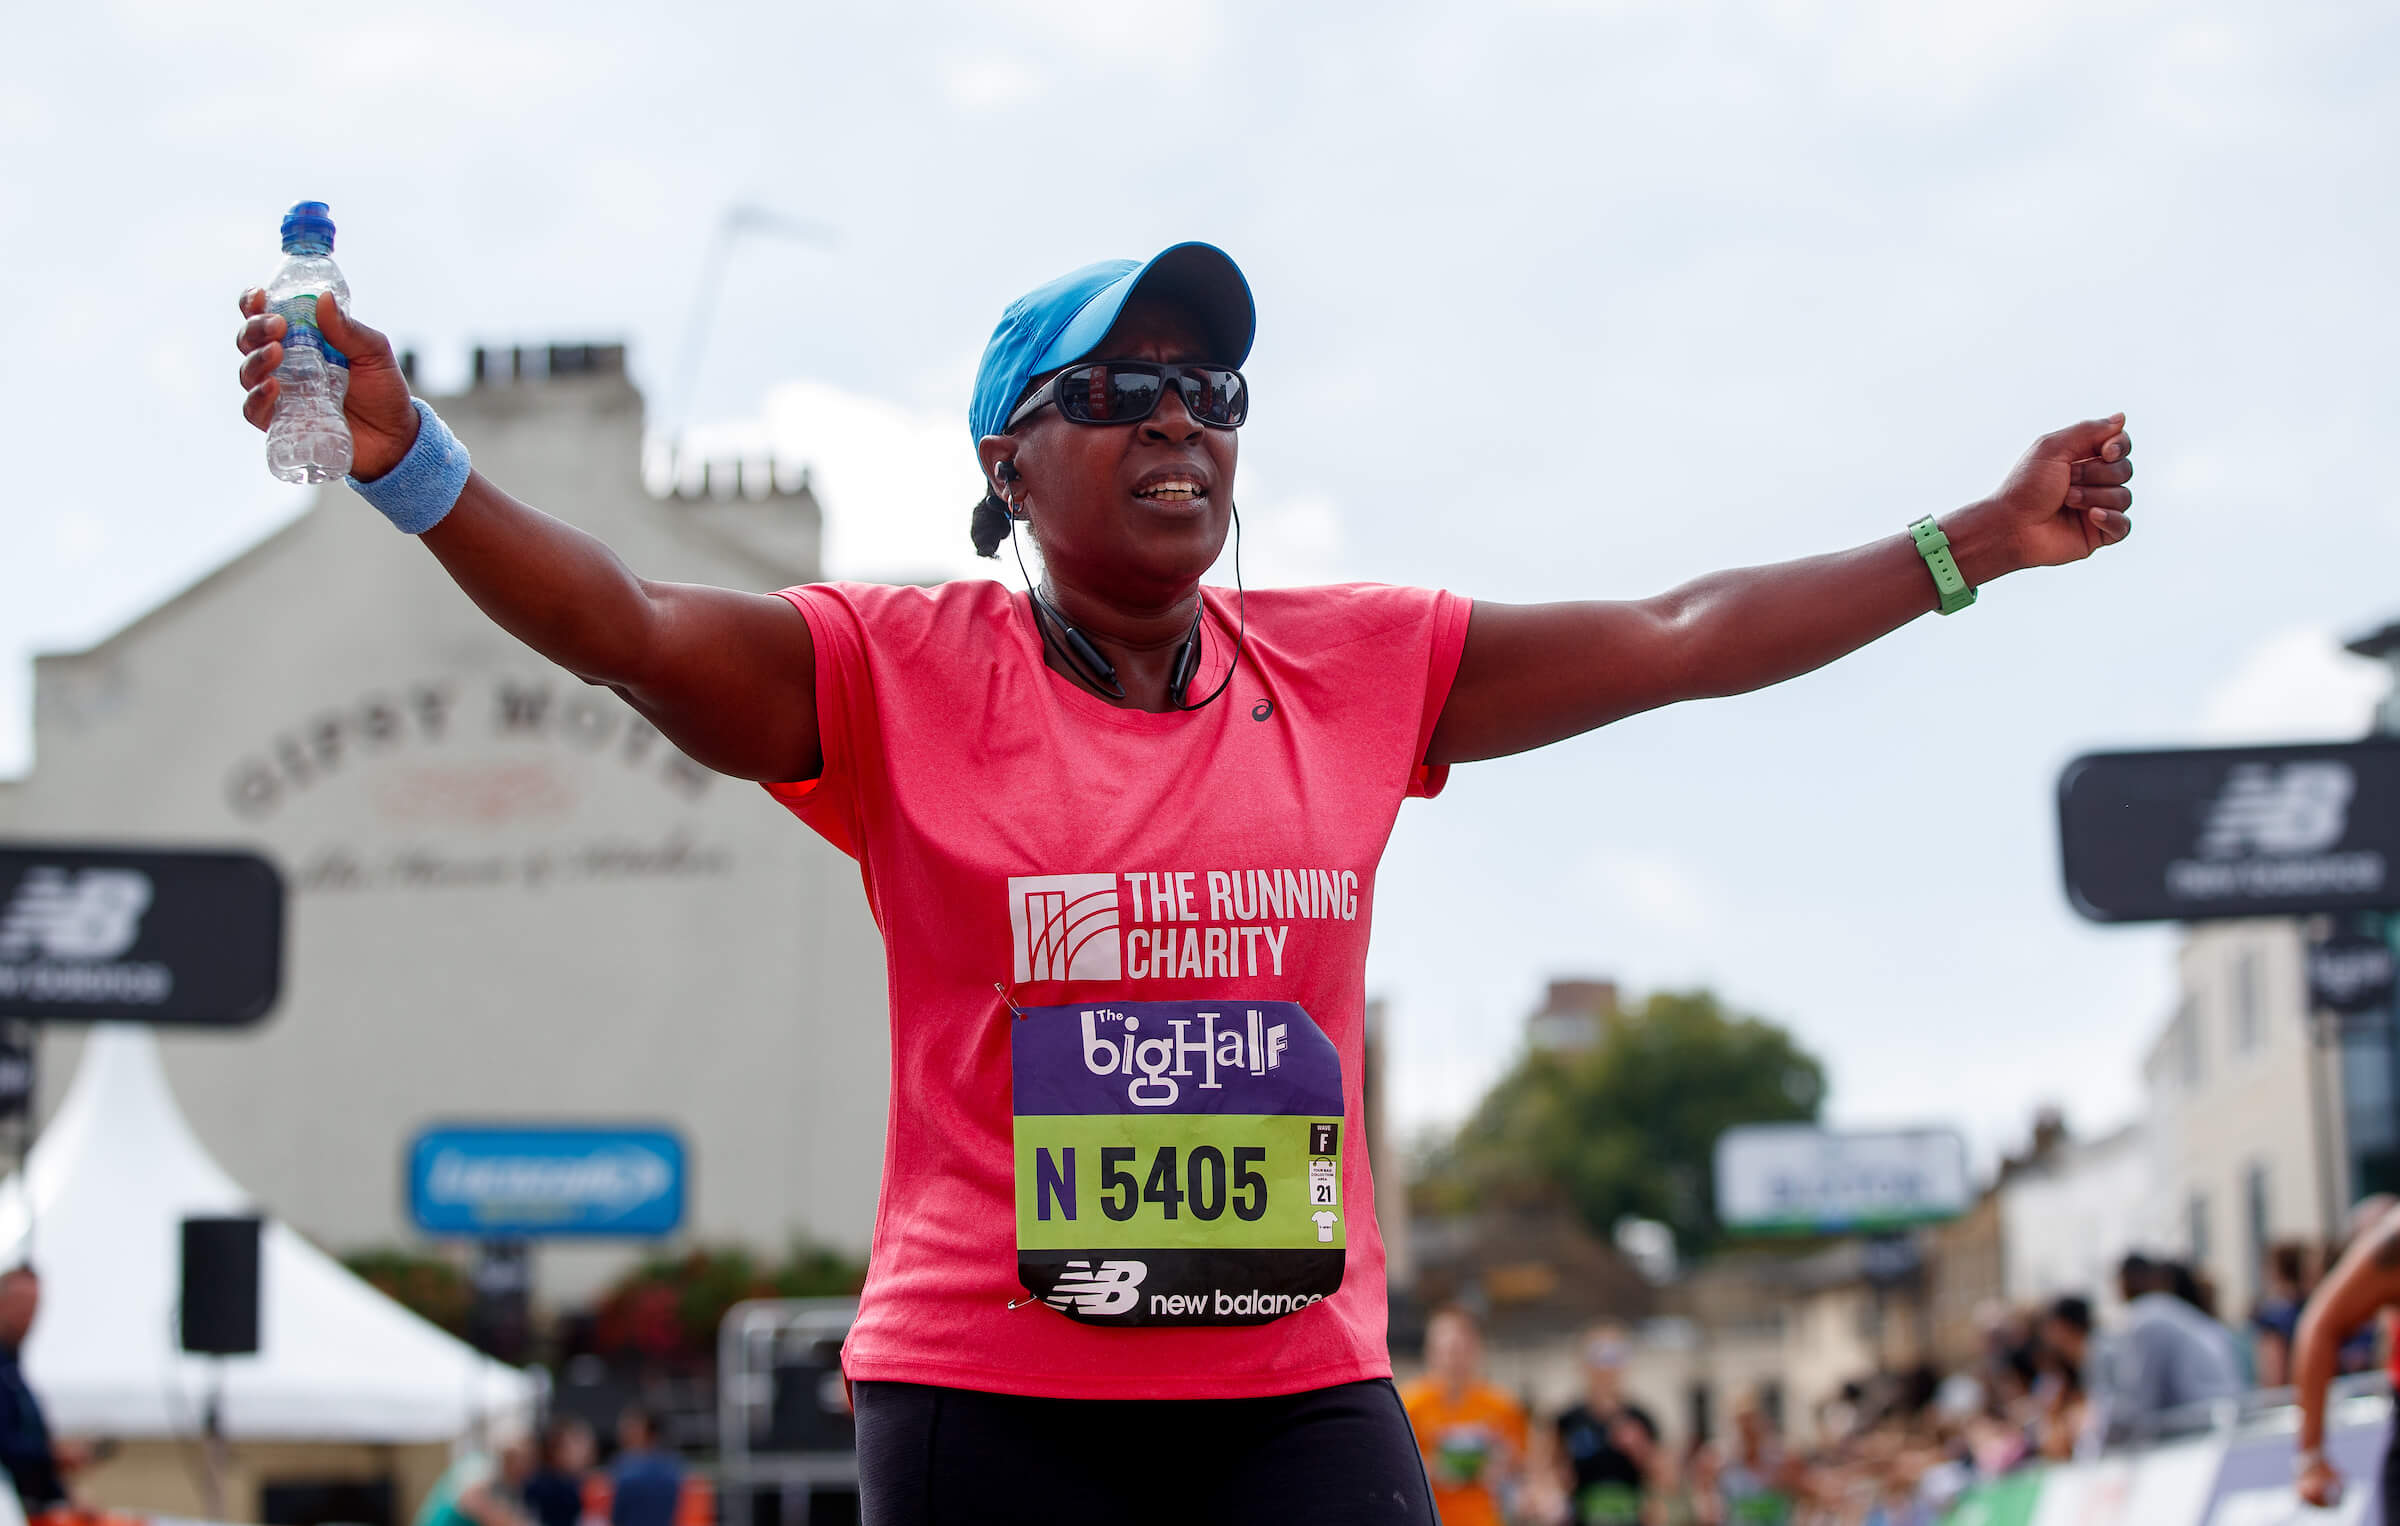 A participant running The Big Half with arms outstretched